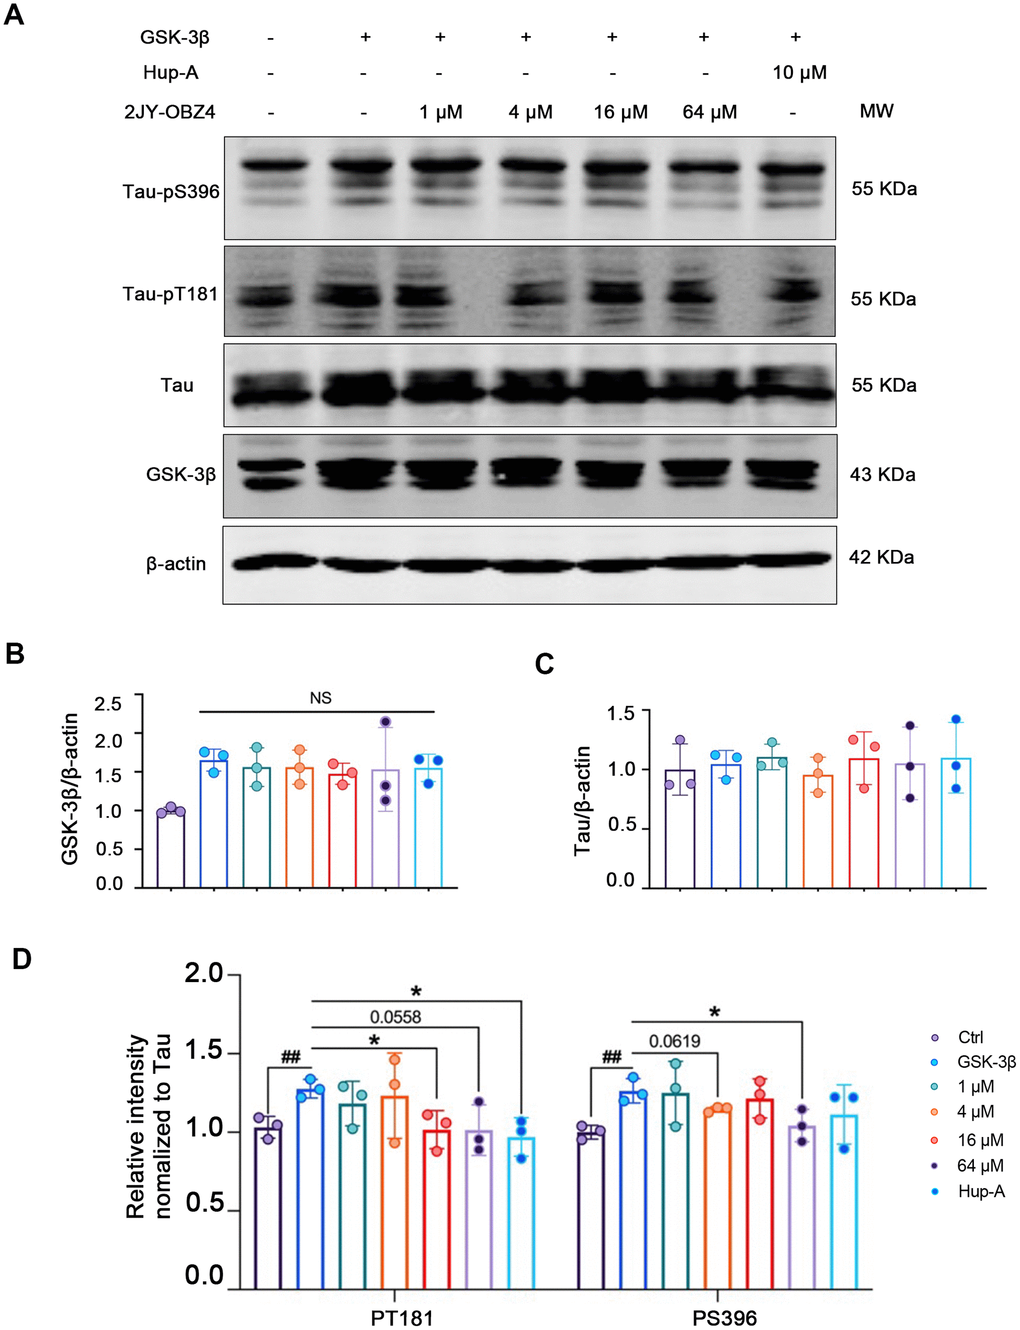 2JY-OBZ4 resisted tau hyperphosphorylation in HEK293-hTau cells transfected with GSK-3β plasmid. (A) Western blots and (B–D) quantitative analysis for GSK-3β, Tau, tau-pT181 and tau-pS396 in HEK293-hTau cells overexpressed with GSK-3β. MW Molecular weight. n = 3 per group. NS means no significance, p value significance is calculated from a one-way ANOVA, data are represented as mean ± SEM. *p 